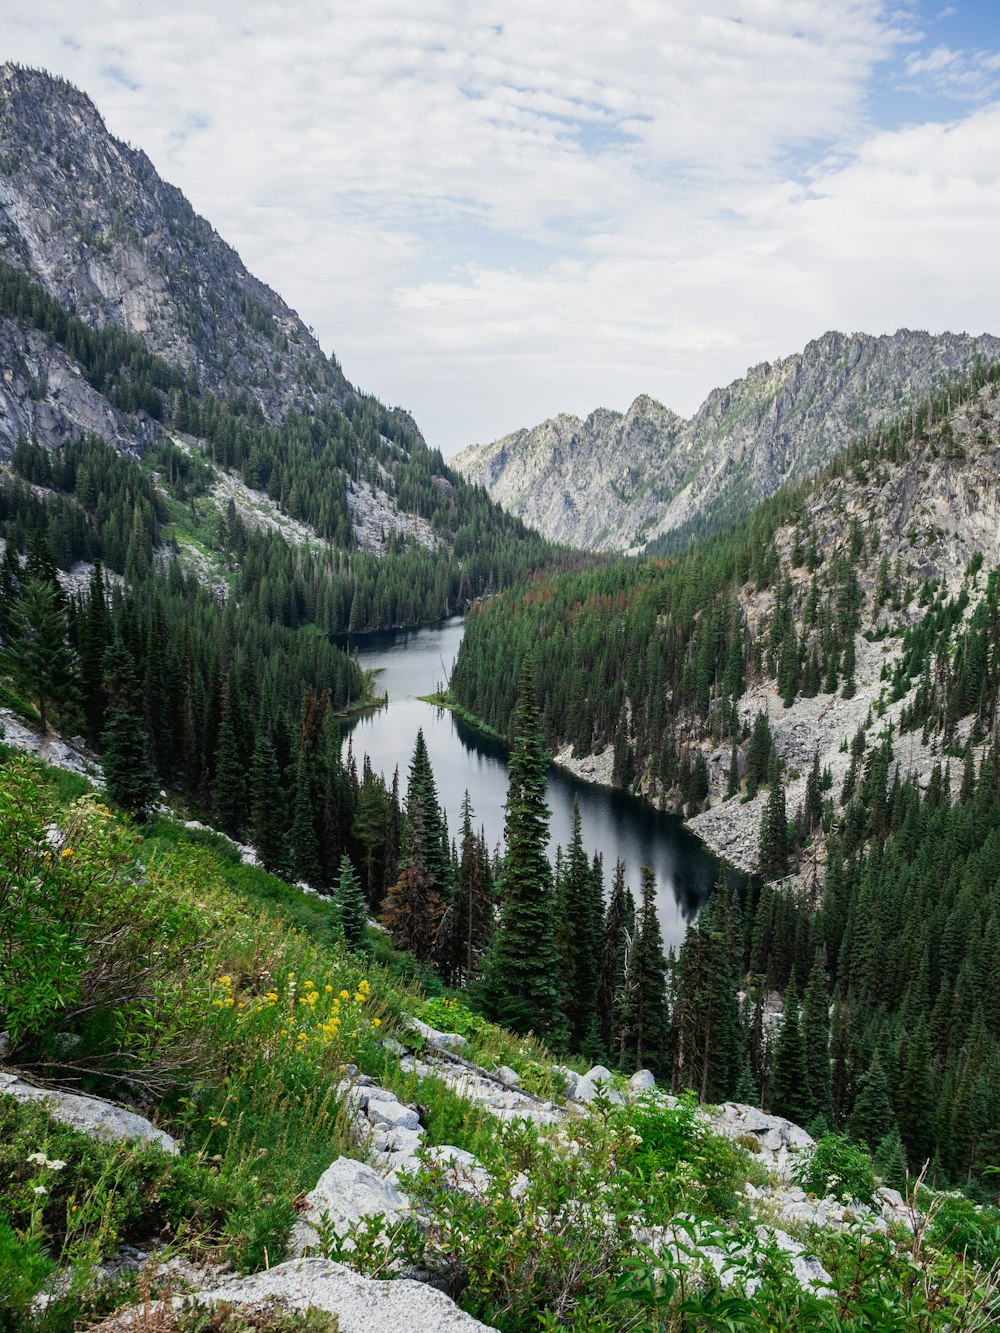 a view of a mountain lake surrounded by pine trees